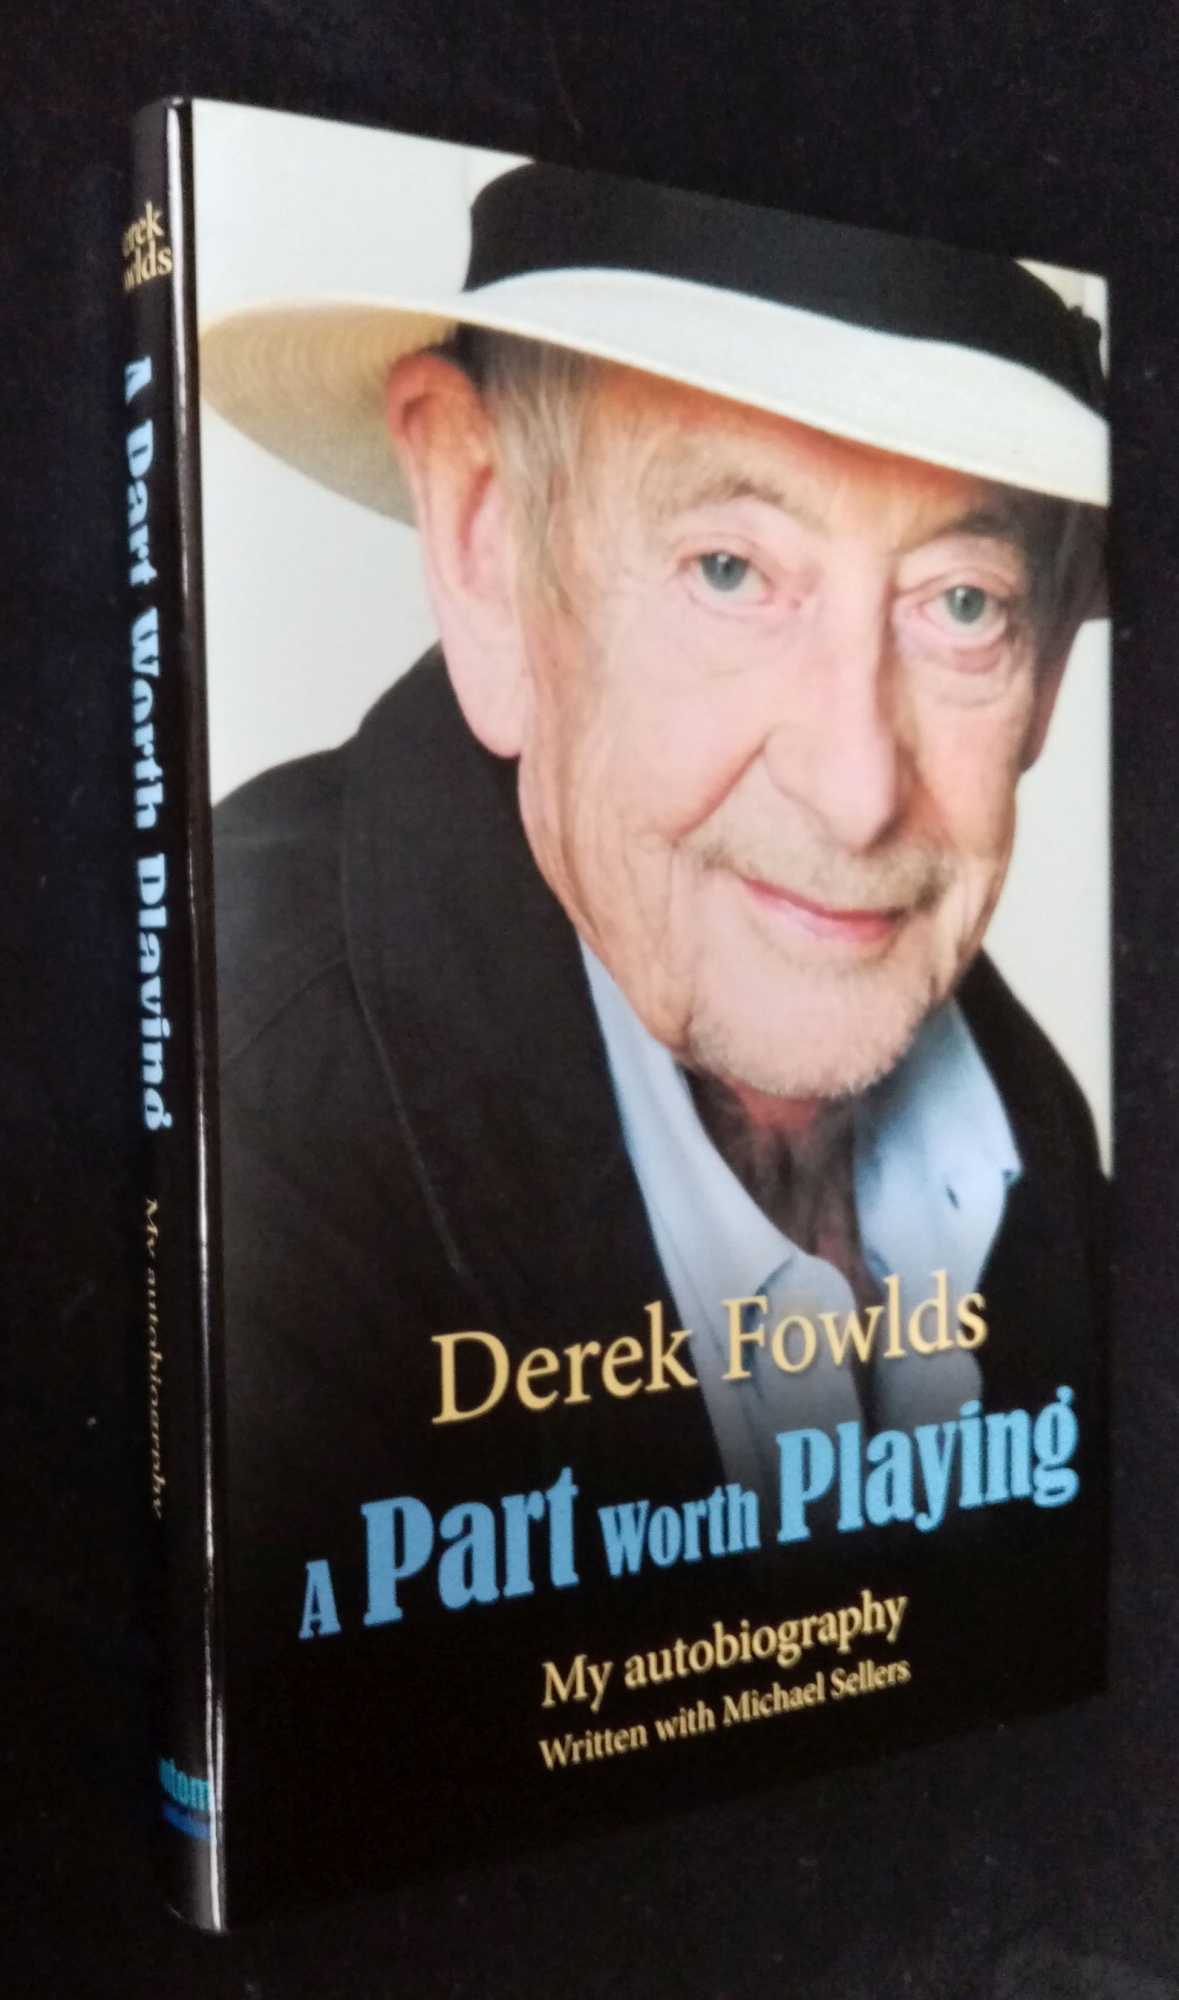 Derek Fowlds, with Michael Sellers - A Part Worth Playing    SIGNED/Inscribed